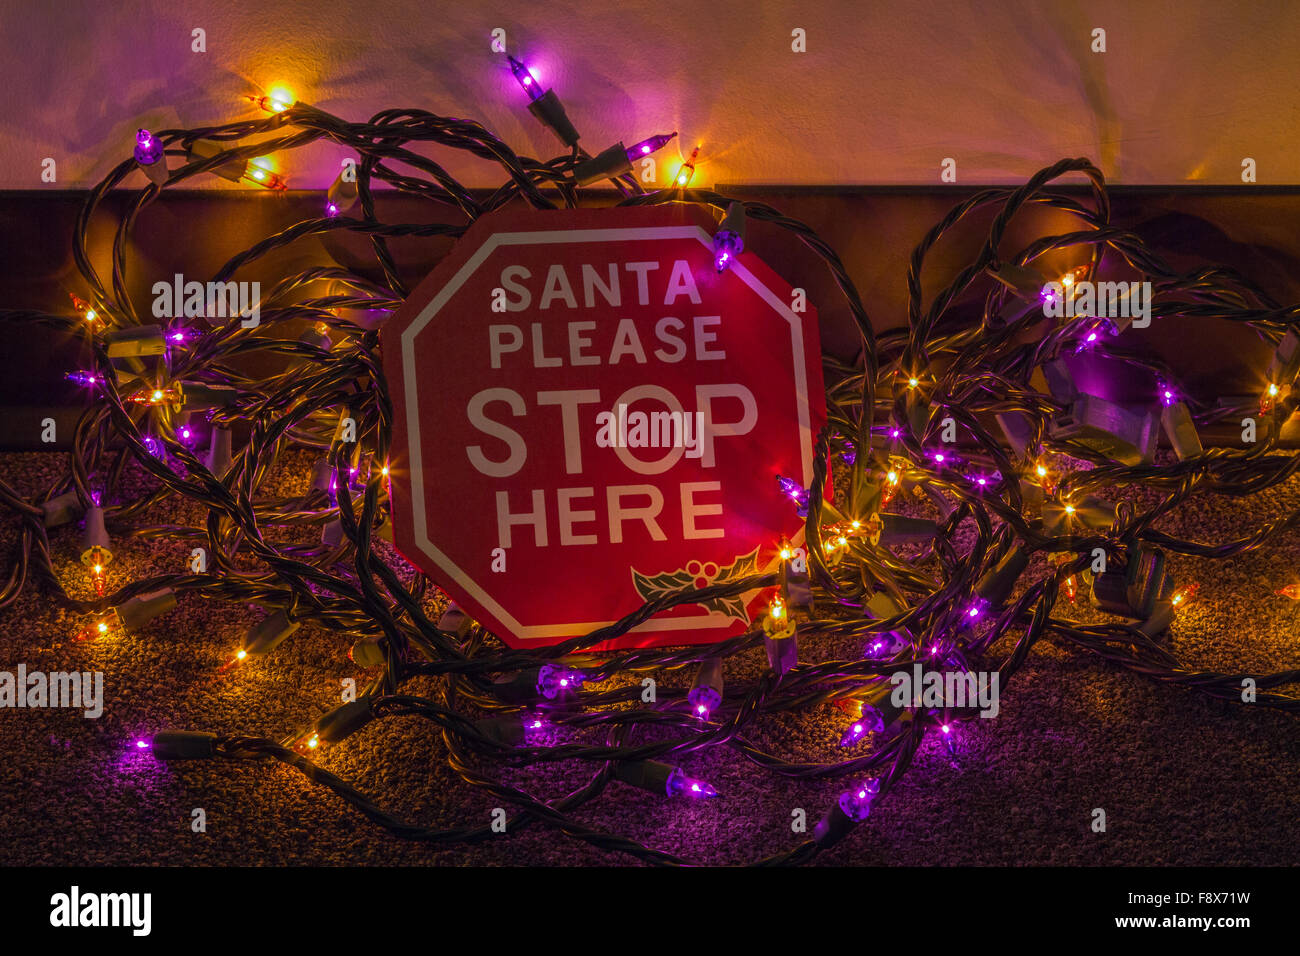 Santa Please Stop Here sign surrounded by purple and gold Christmas lights. It is laying on the floor with jumbled Christmas tree lights. Stock Photo